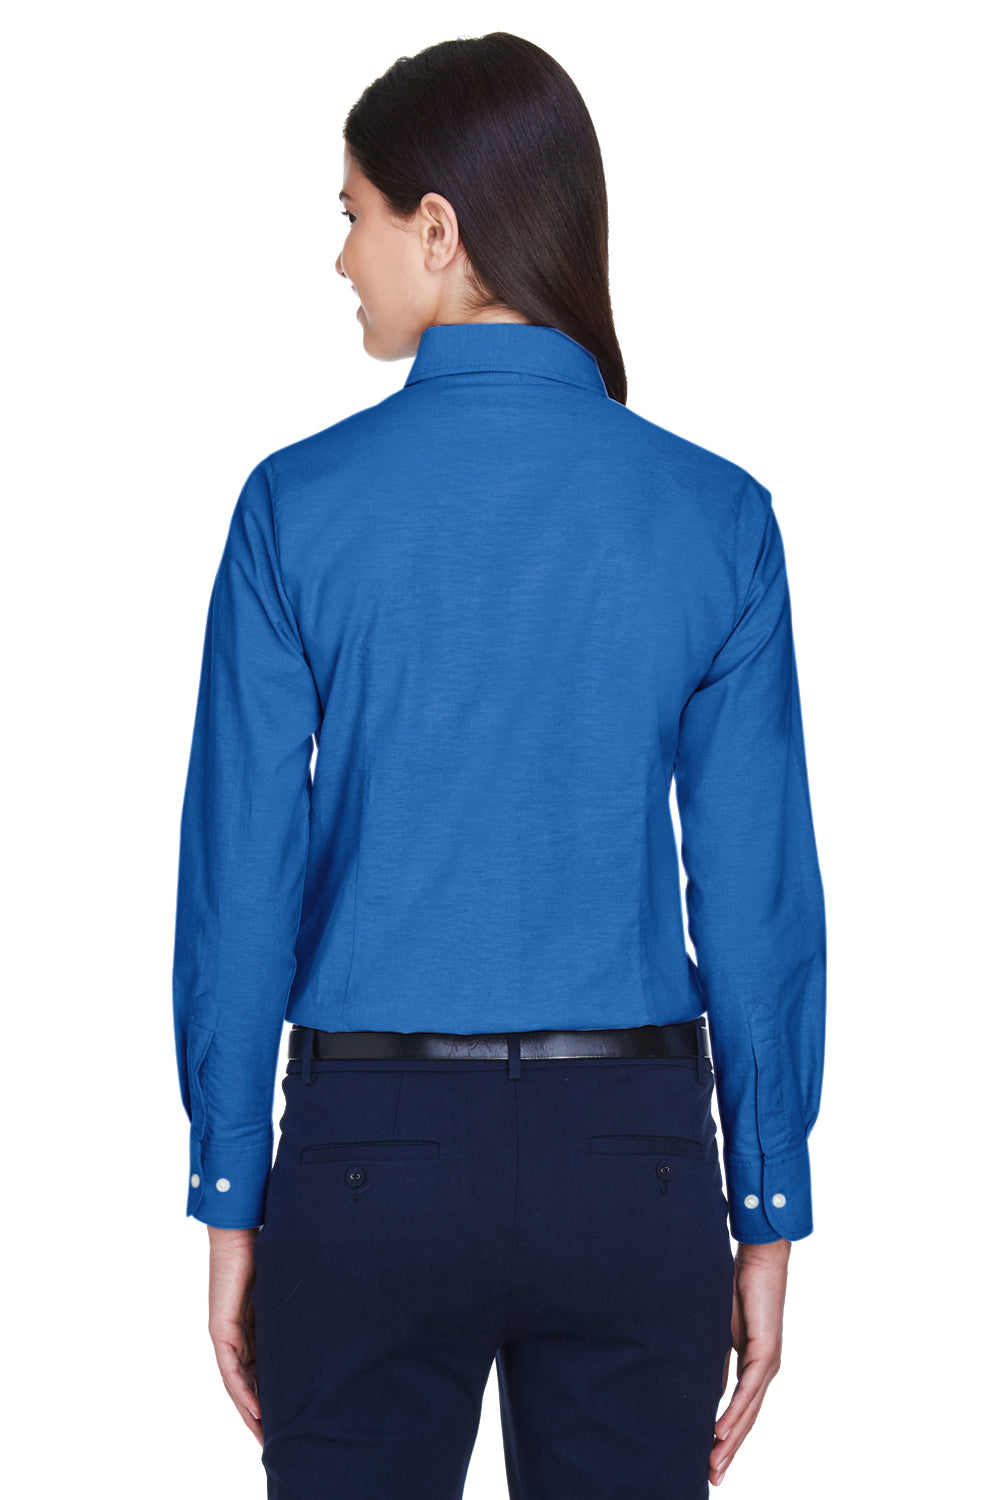 Harriton M600W Womens Oxford Wrinkle Resistant Long Sleeve Button Down Shirt French Blue Back